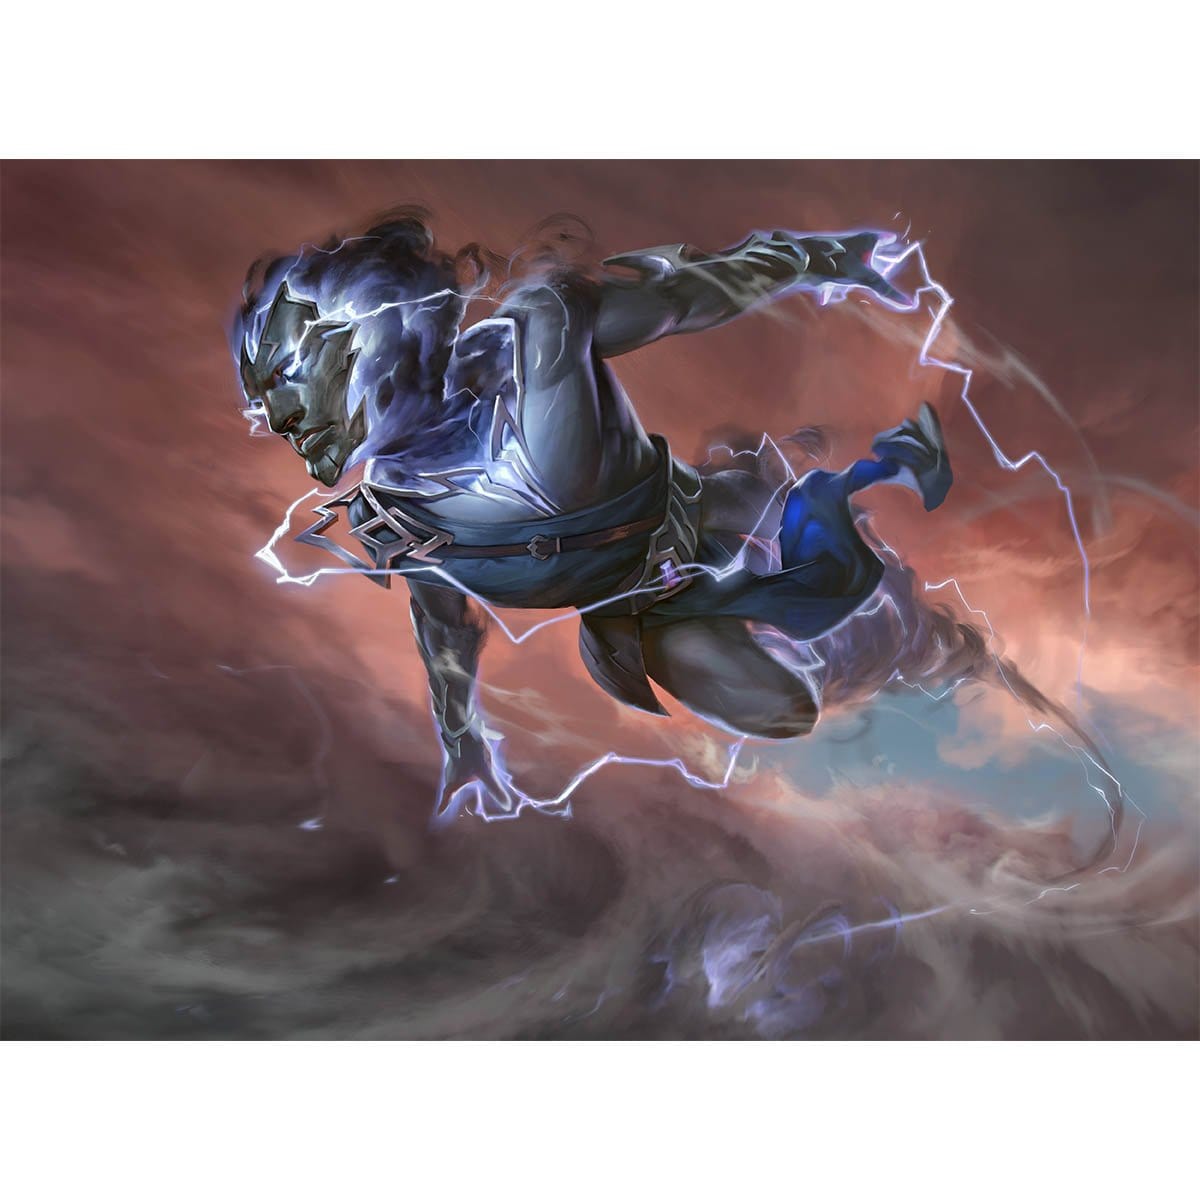 Lightning Stormkin Print - Print - Original Magic Art - Accessories for Magic the Gathering and other card games